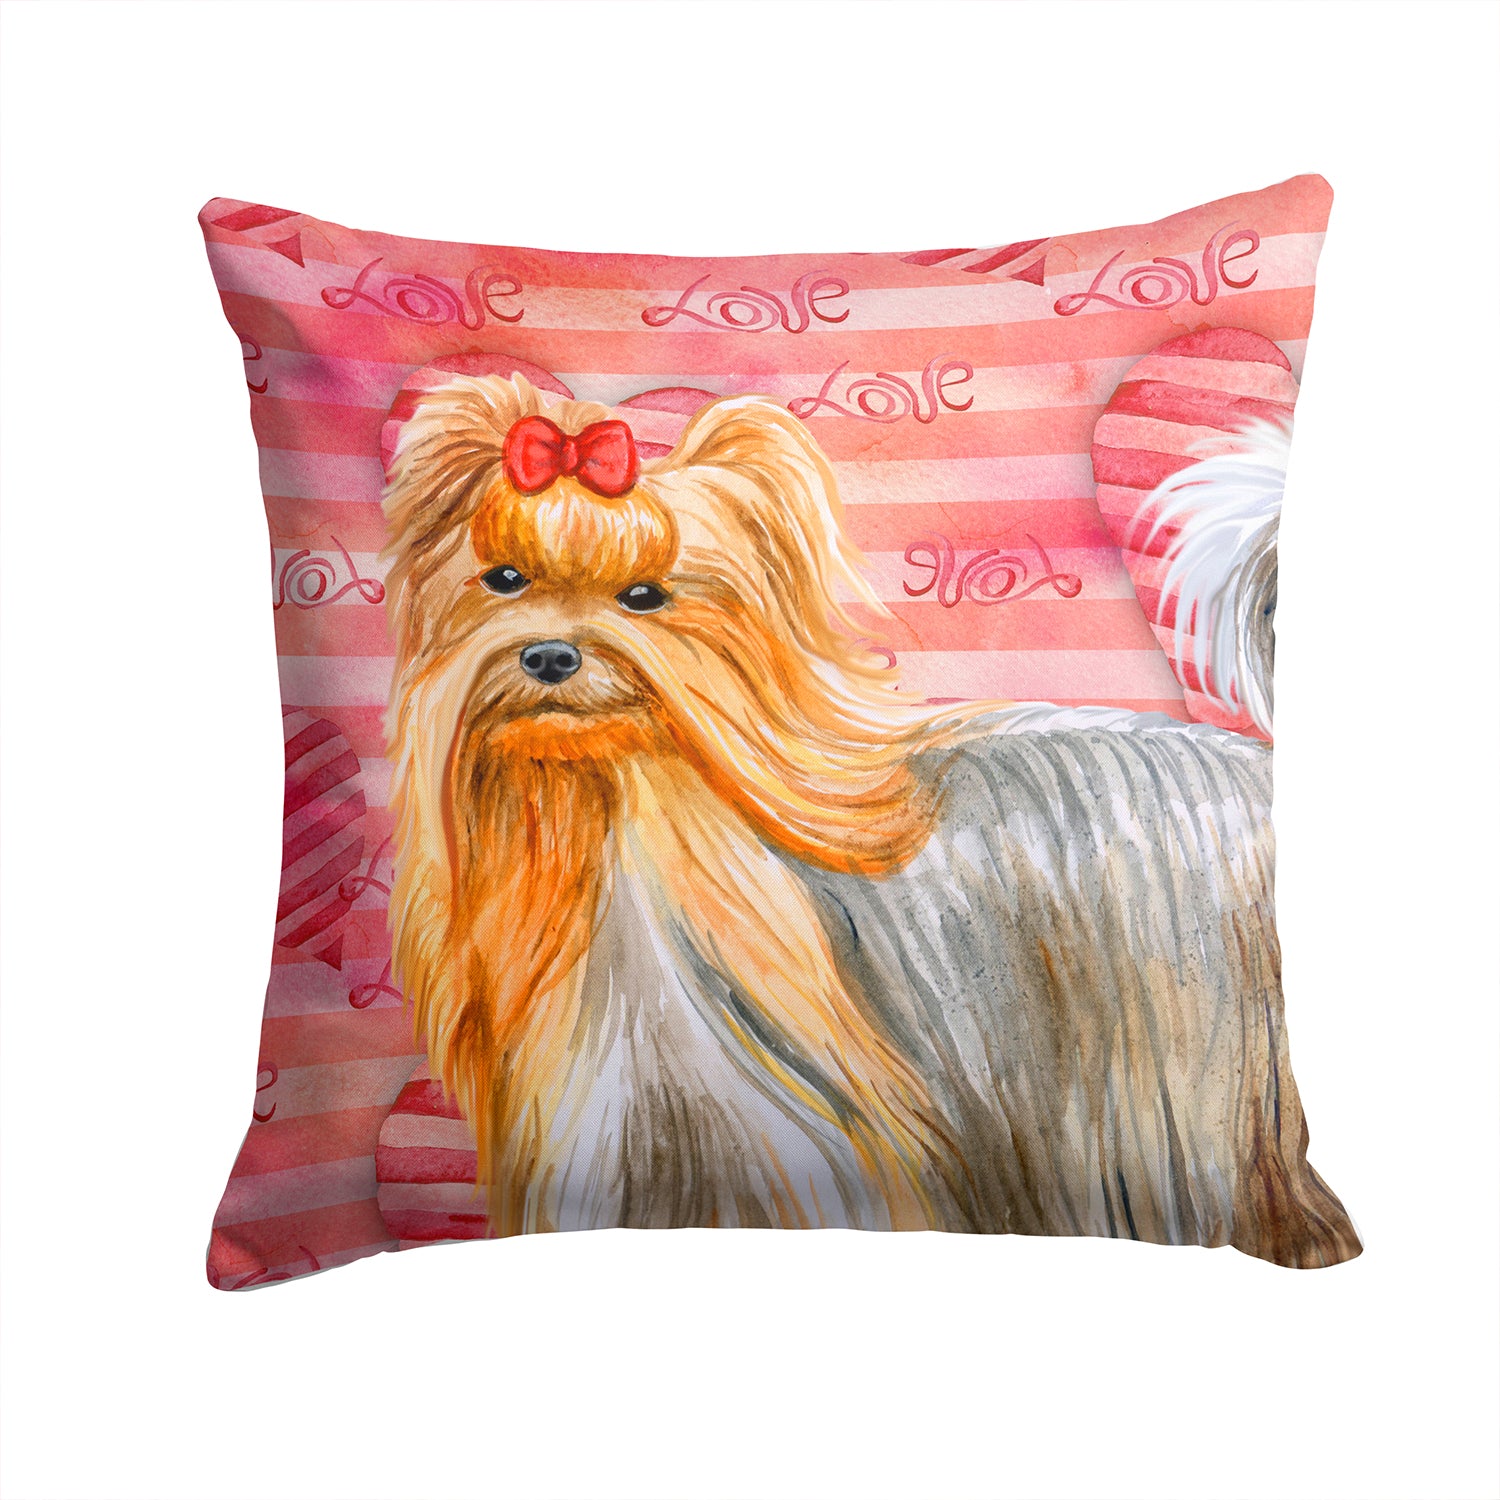 Yorkshire Terrier Love Fabric Decorative Pillow BB9772PW1414 - the-store.com